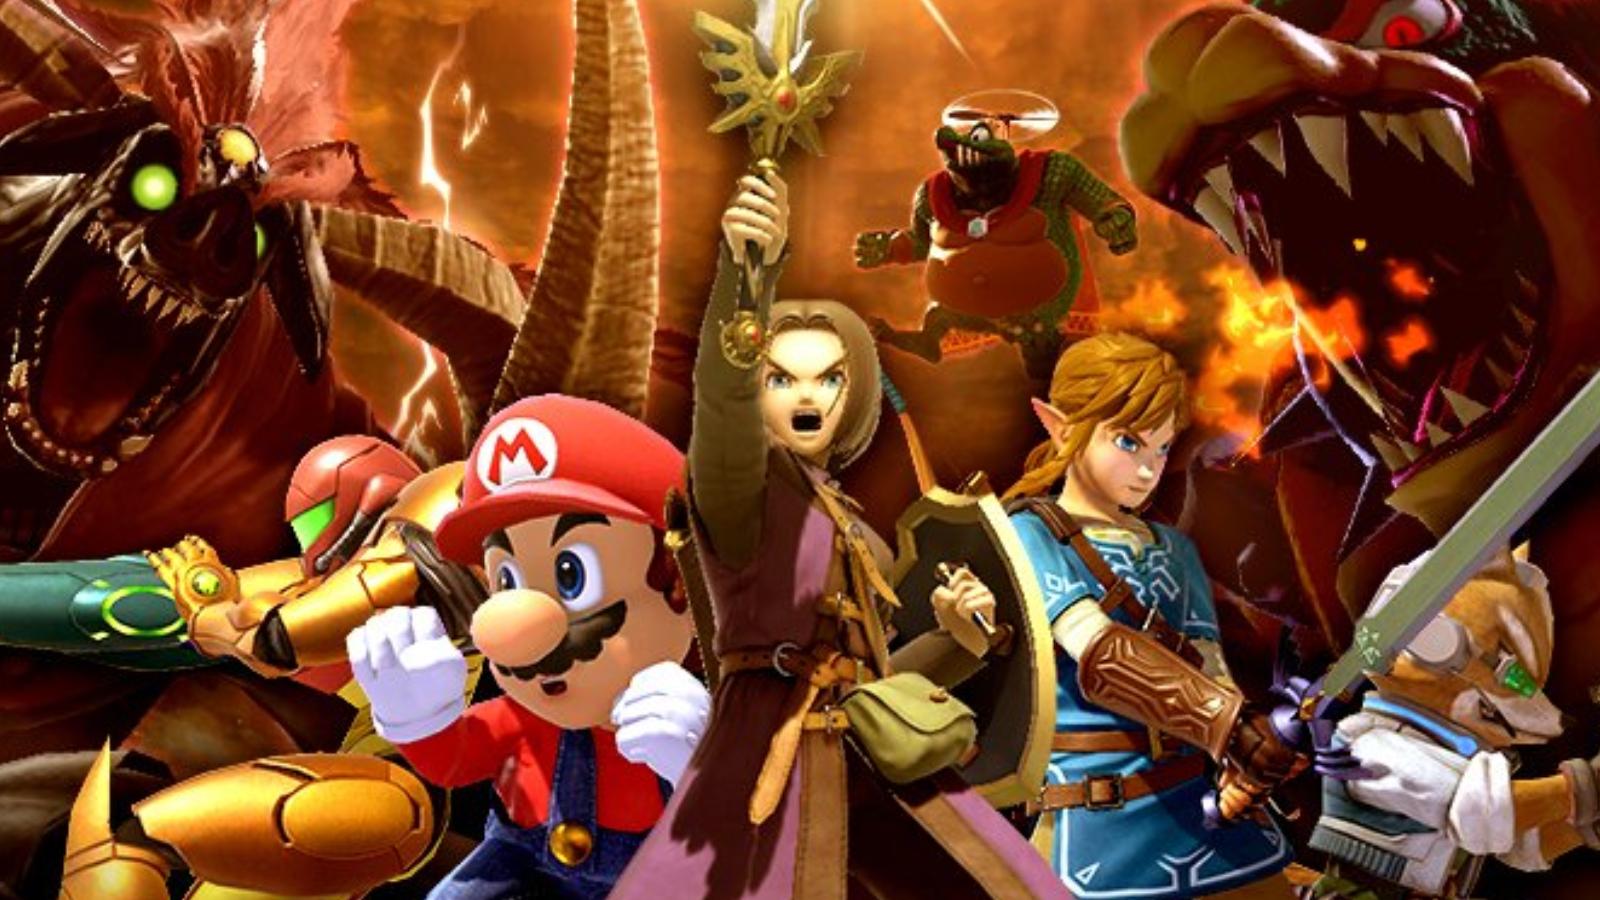 Super Smash Bros Ultimate Nintendo Switch: what the top players